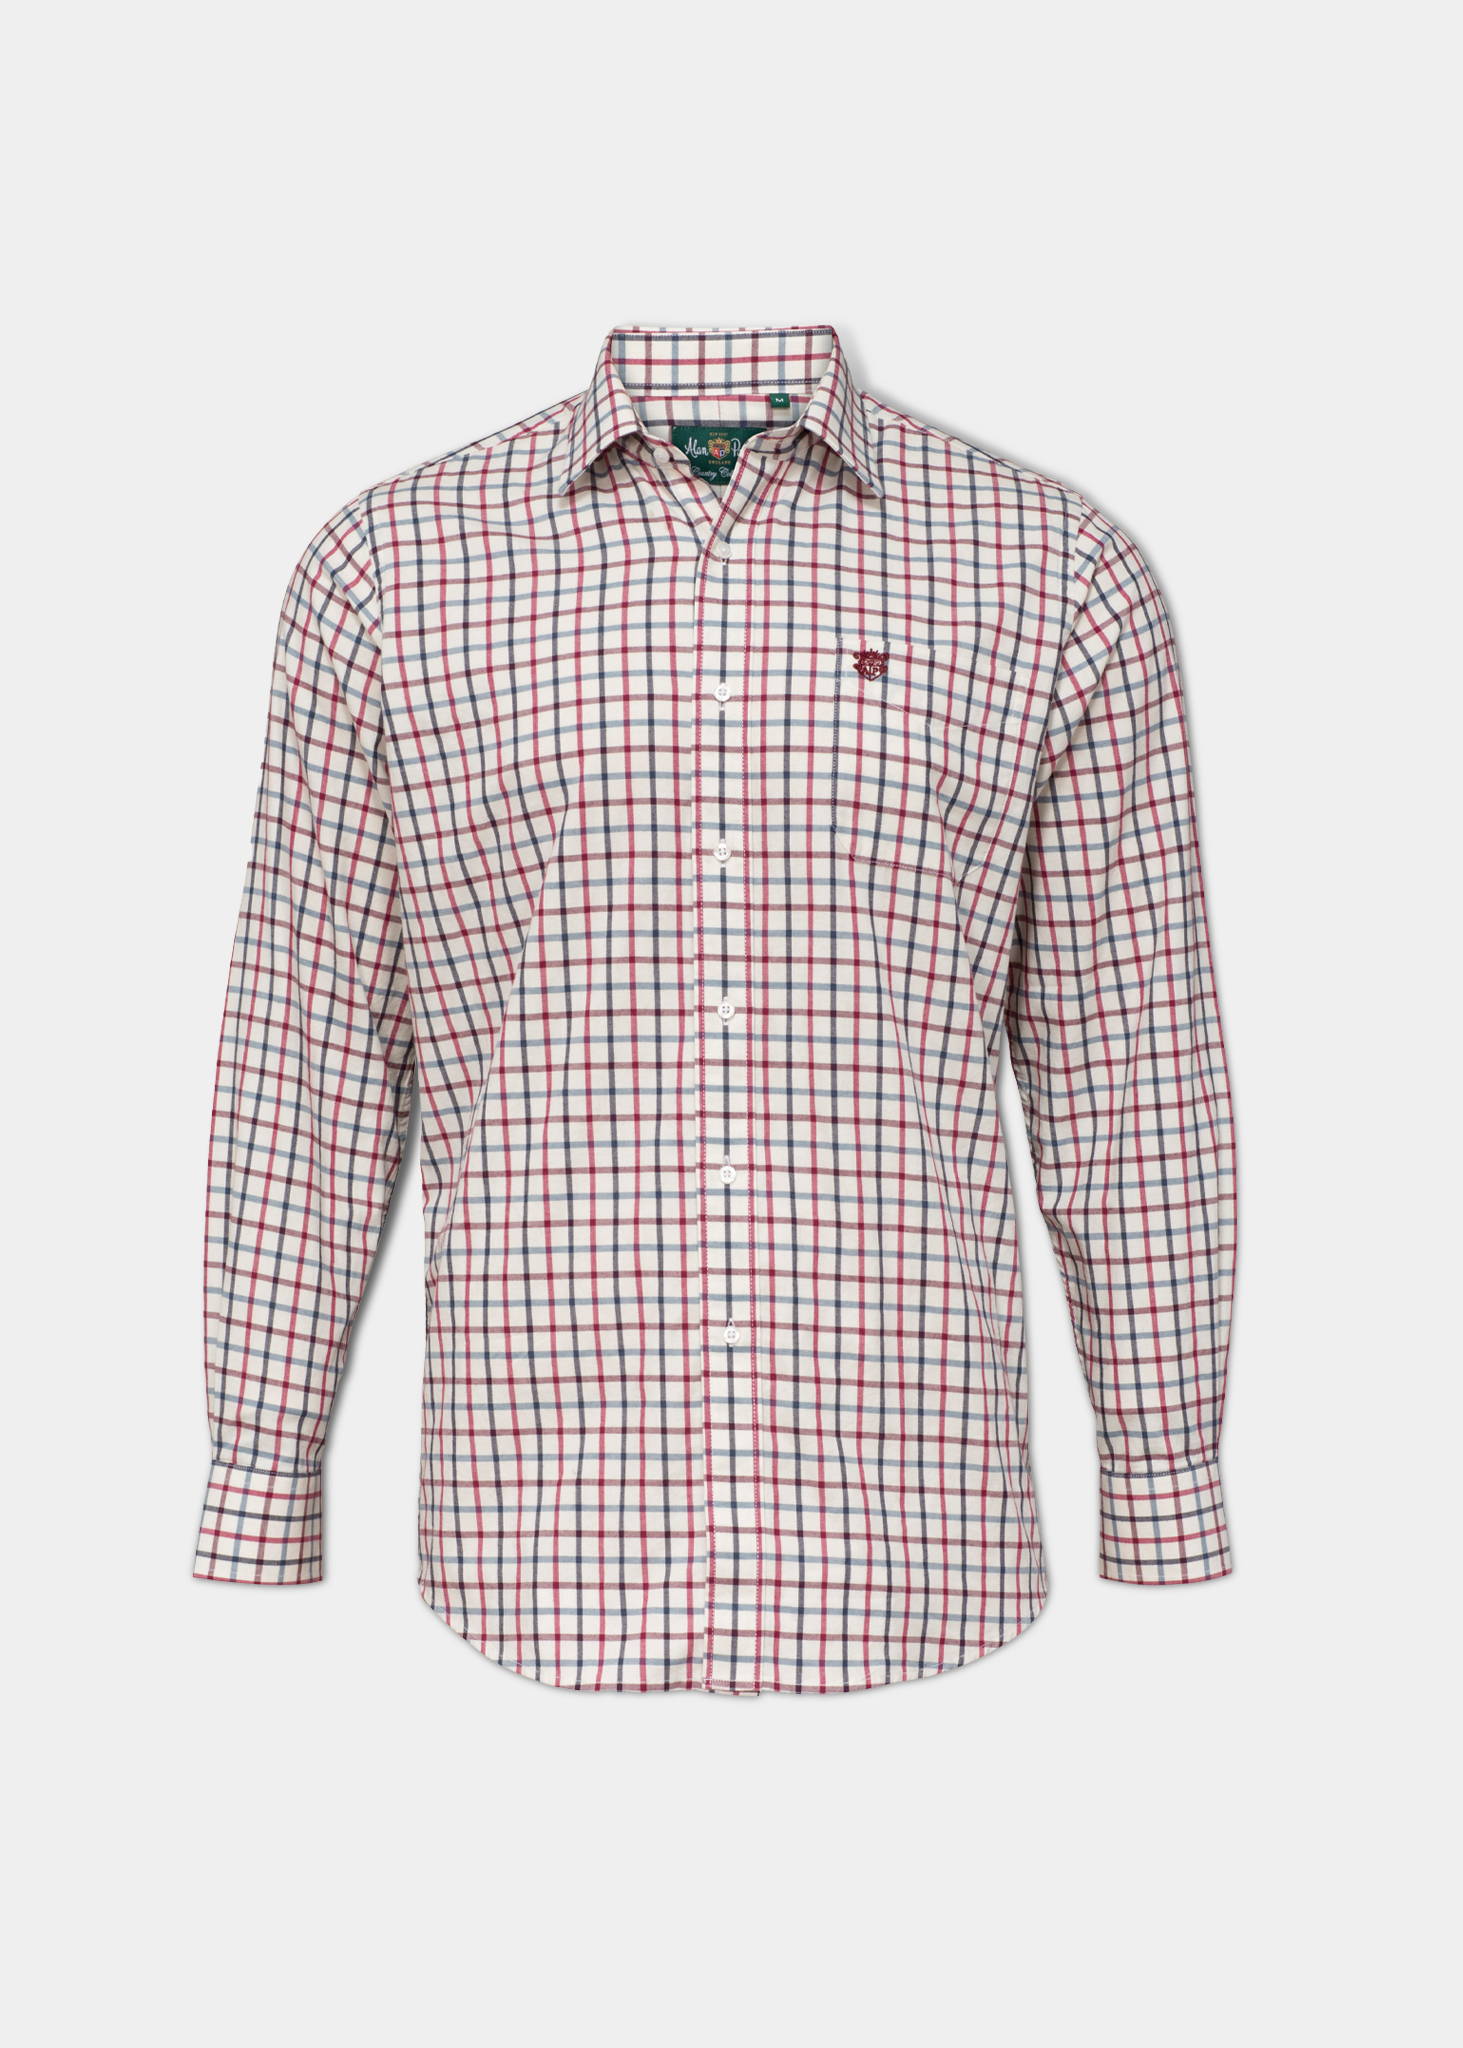 ILKLEY MEN'S RED CHECK COUNTRY SHIRT - SHOOTING FIT